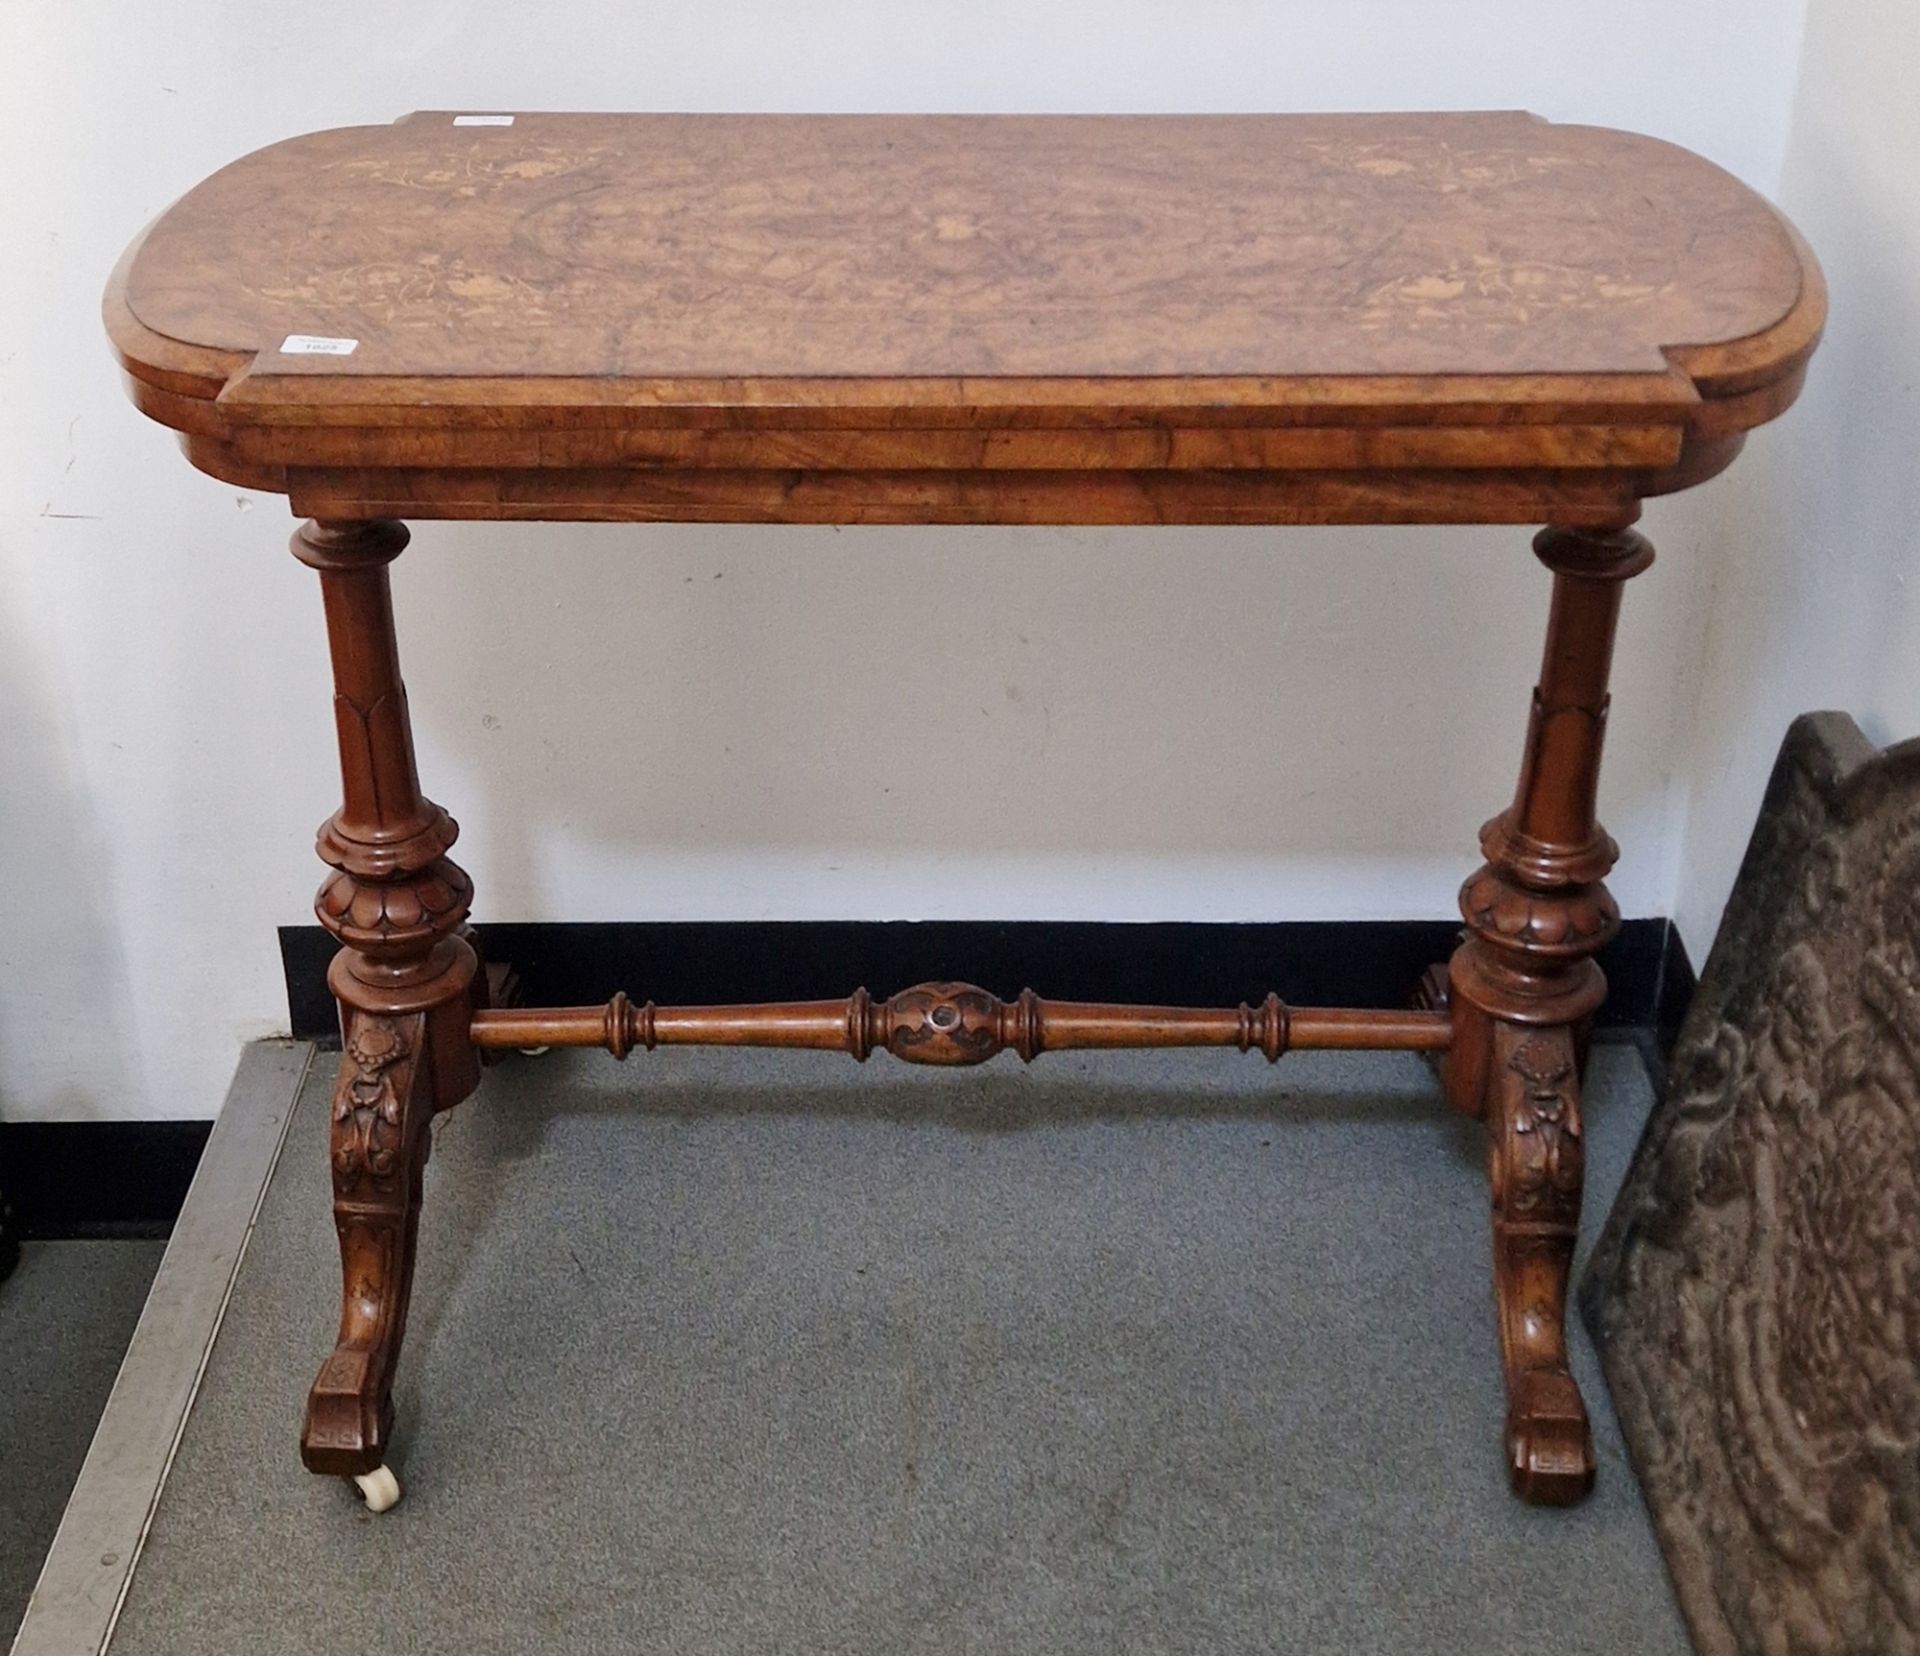 Late 19th century burr walnut hall table with inlaid marquetry scrolling foliate motifs, on carved